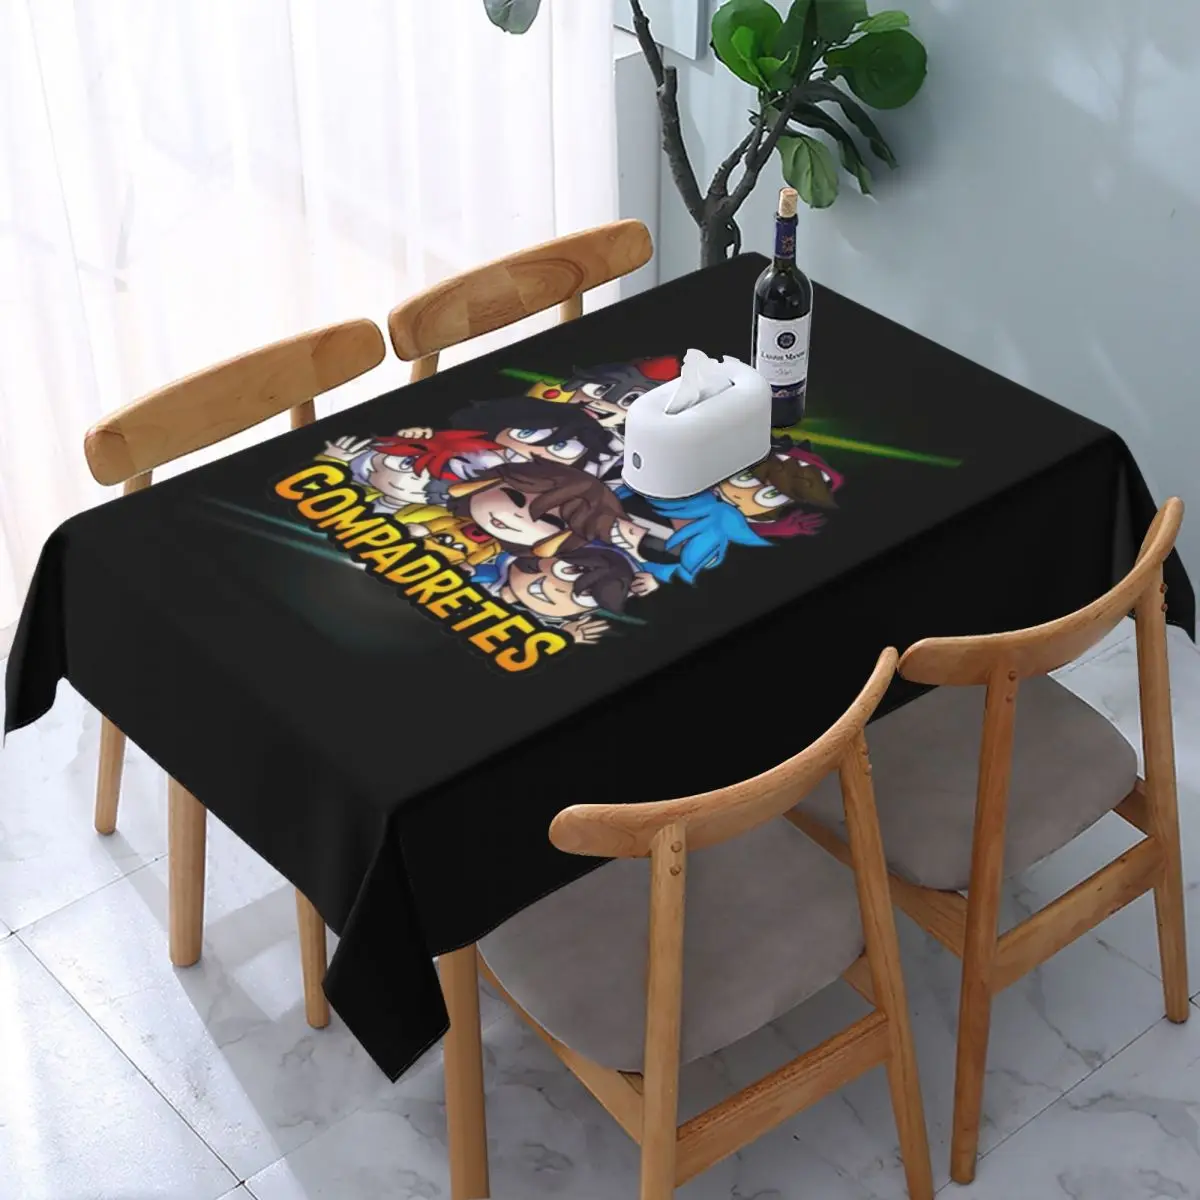 

Rectangular Fitted Compadretes Group Table Cloth Oilproof Tablecloth 40"-44" Table Cover Backed with Elastic Edge